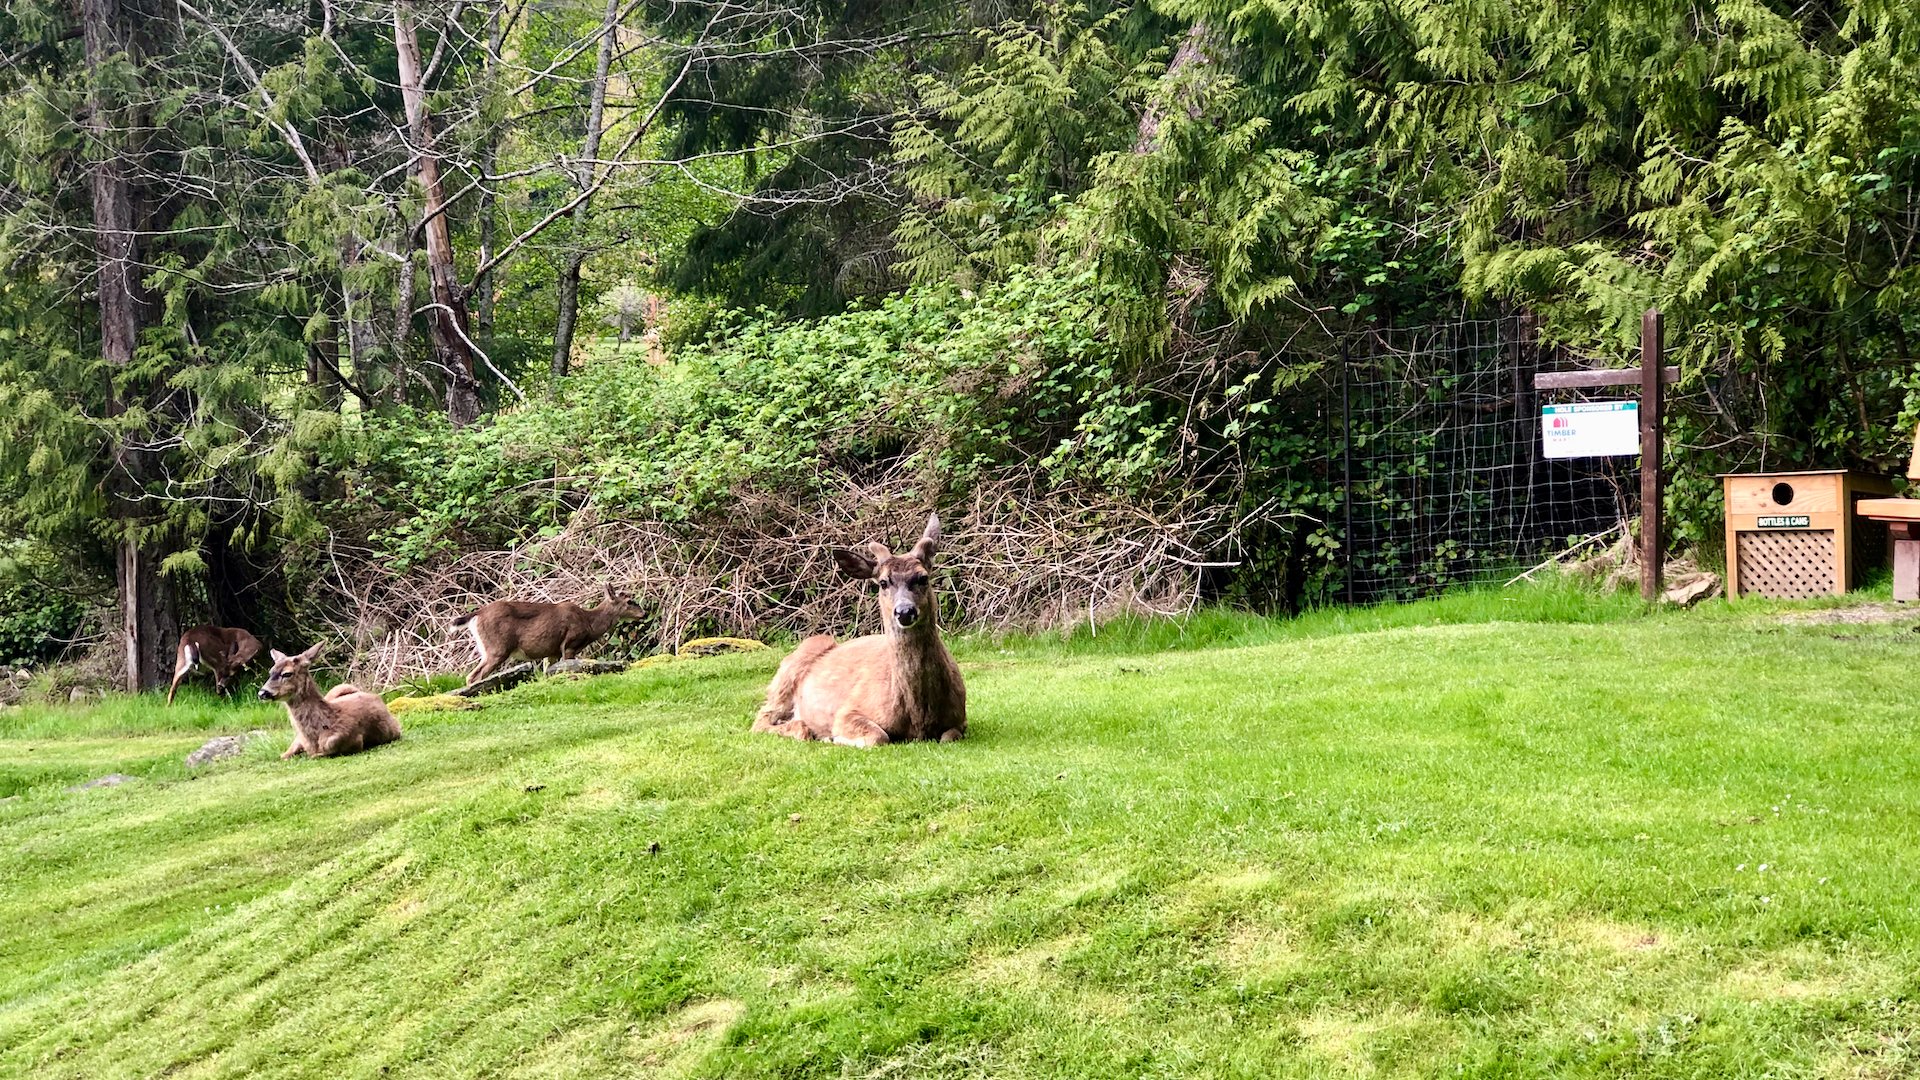  The local herd of deer are hilarious. This one was sitting on the second tee while its friends browsed away. It didn’t move until I walked right beside it, but my ball on the tee and took a couple of practice swings. Crazy beasts. 